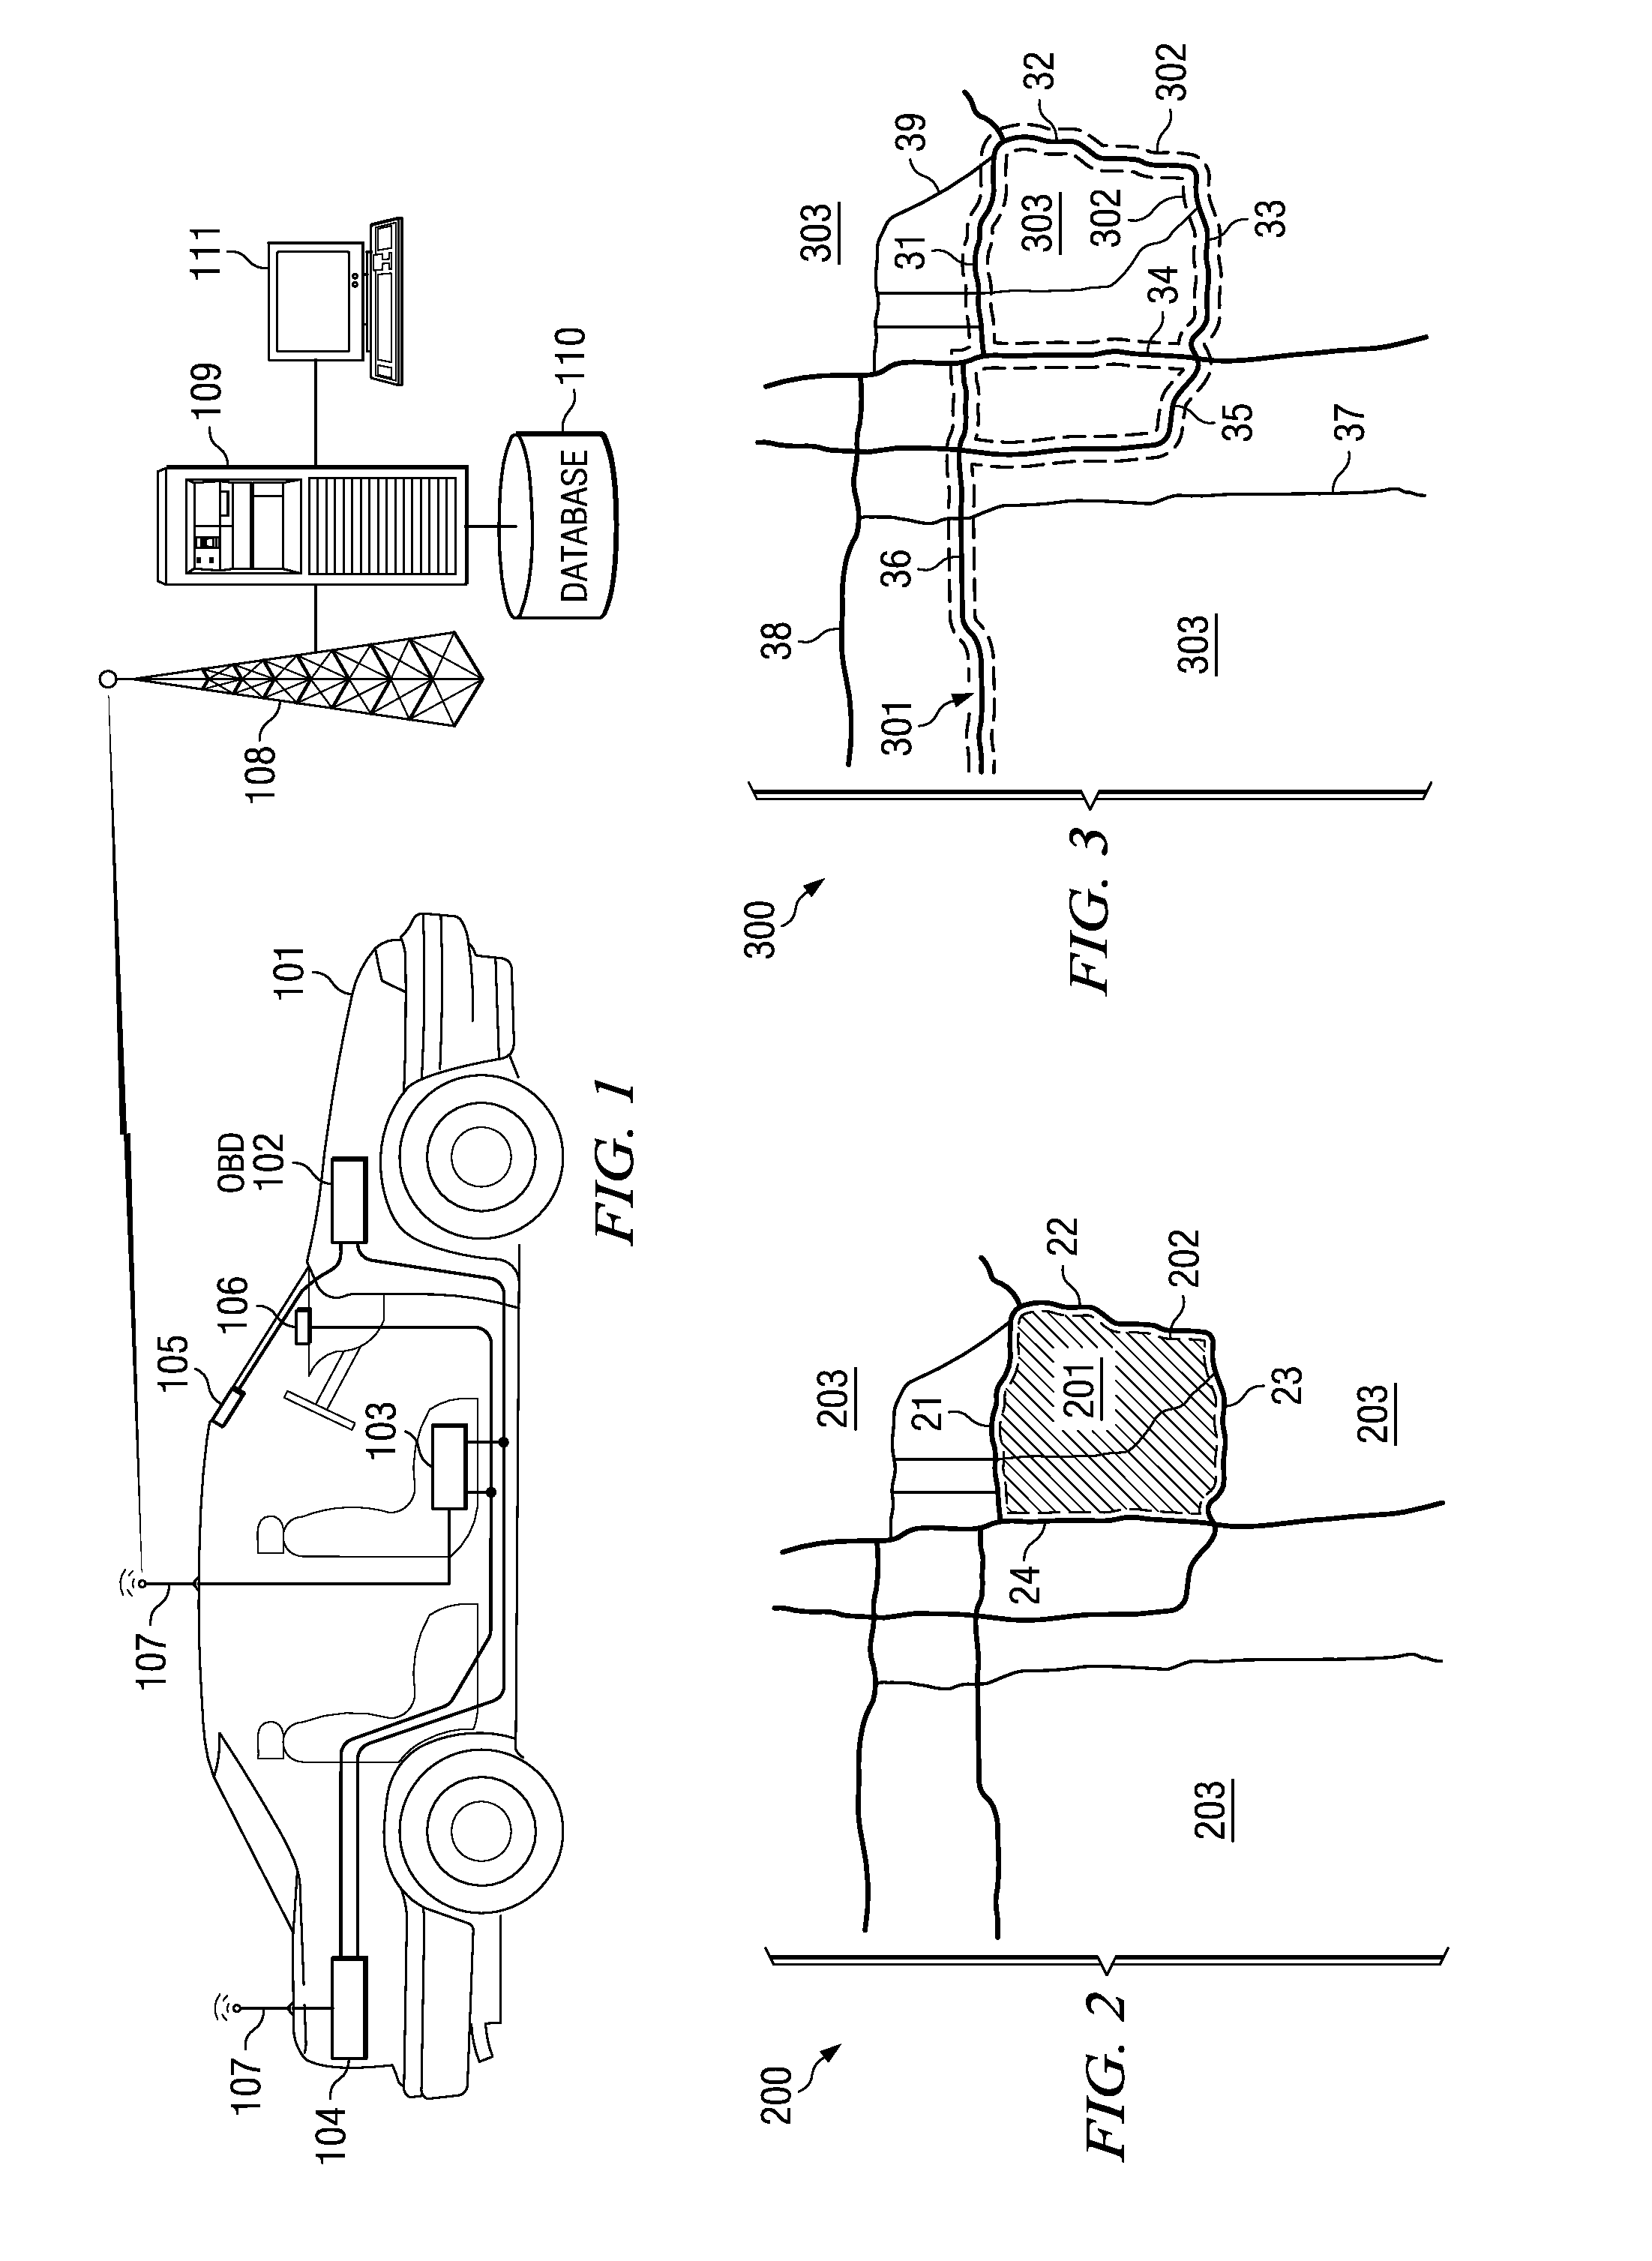 System and Method for Defining Areas of Interest and Modifying Asset Monitoring in Relation Thereto